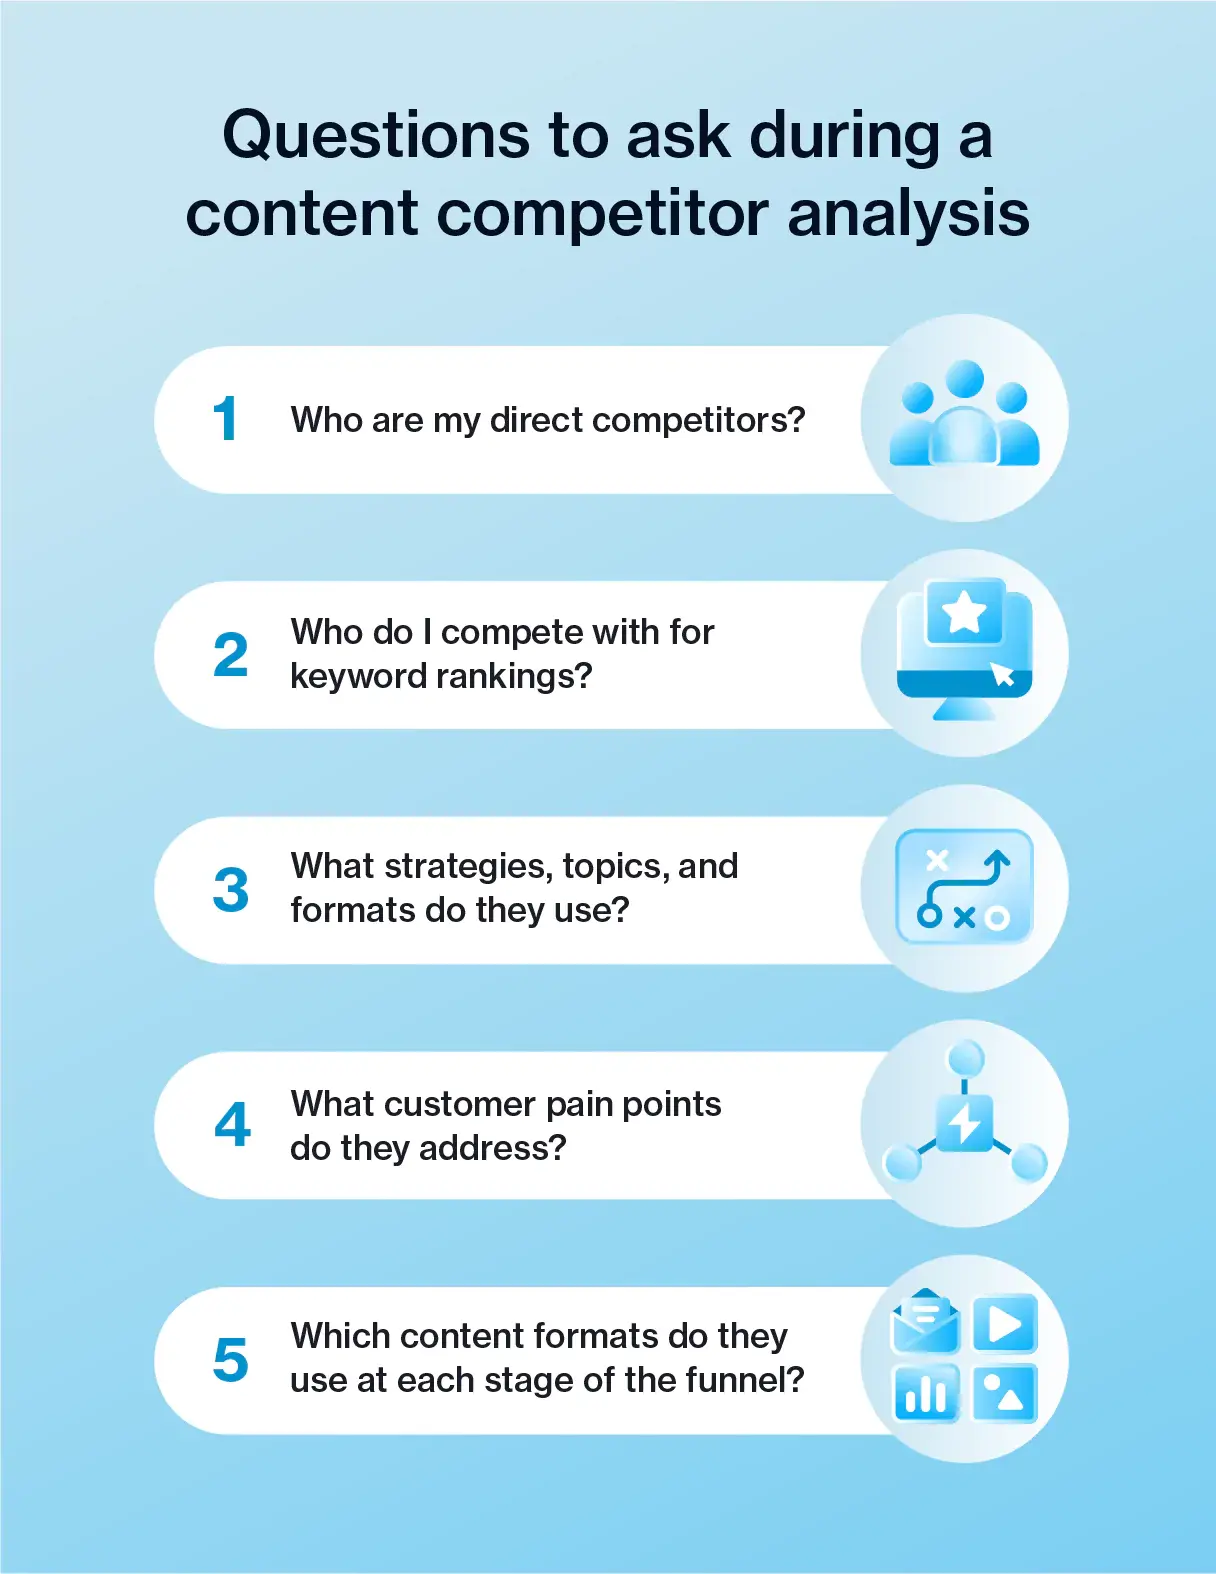 Graphic of questions to ask during a content competitor analysis